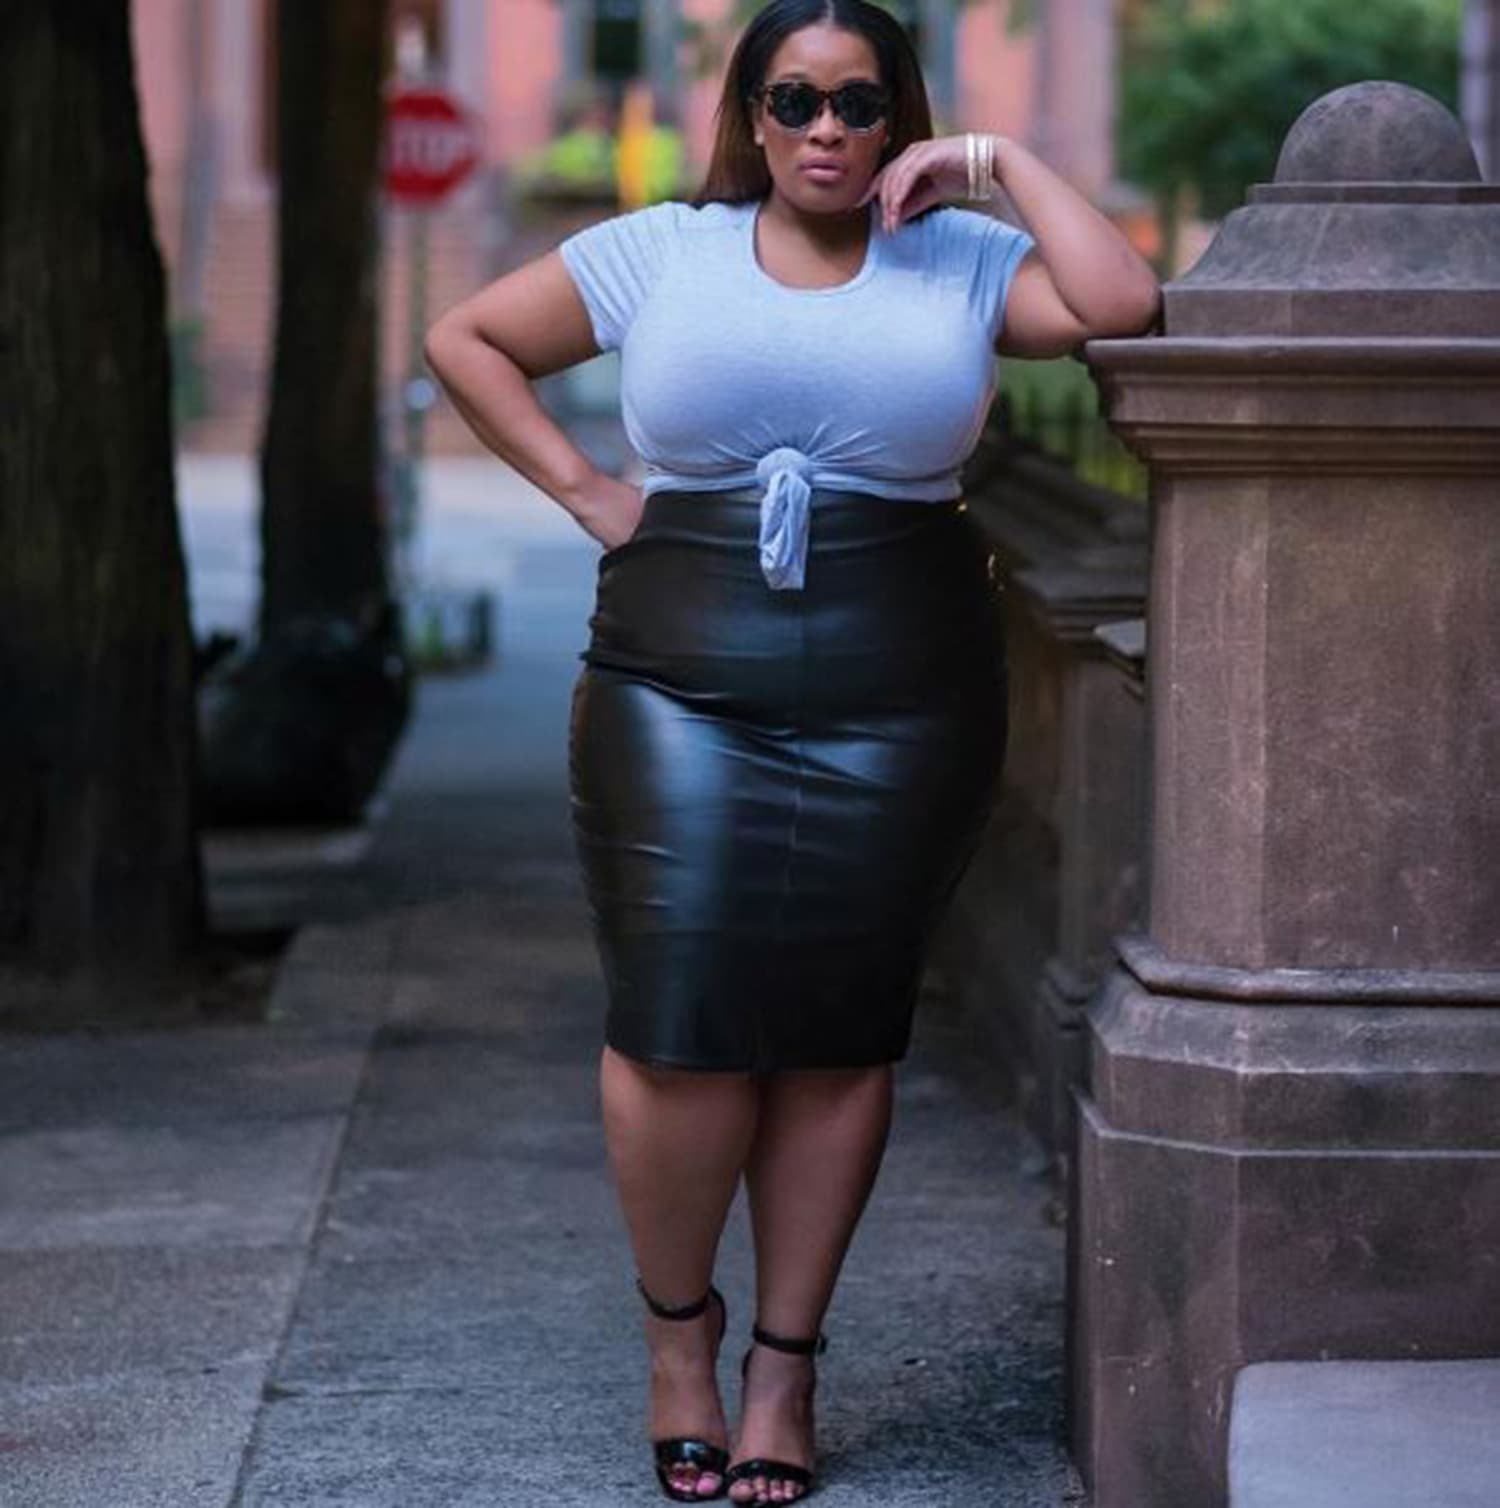 Plus Size Model Celebrates Curves and Inclusion with Body